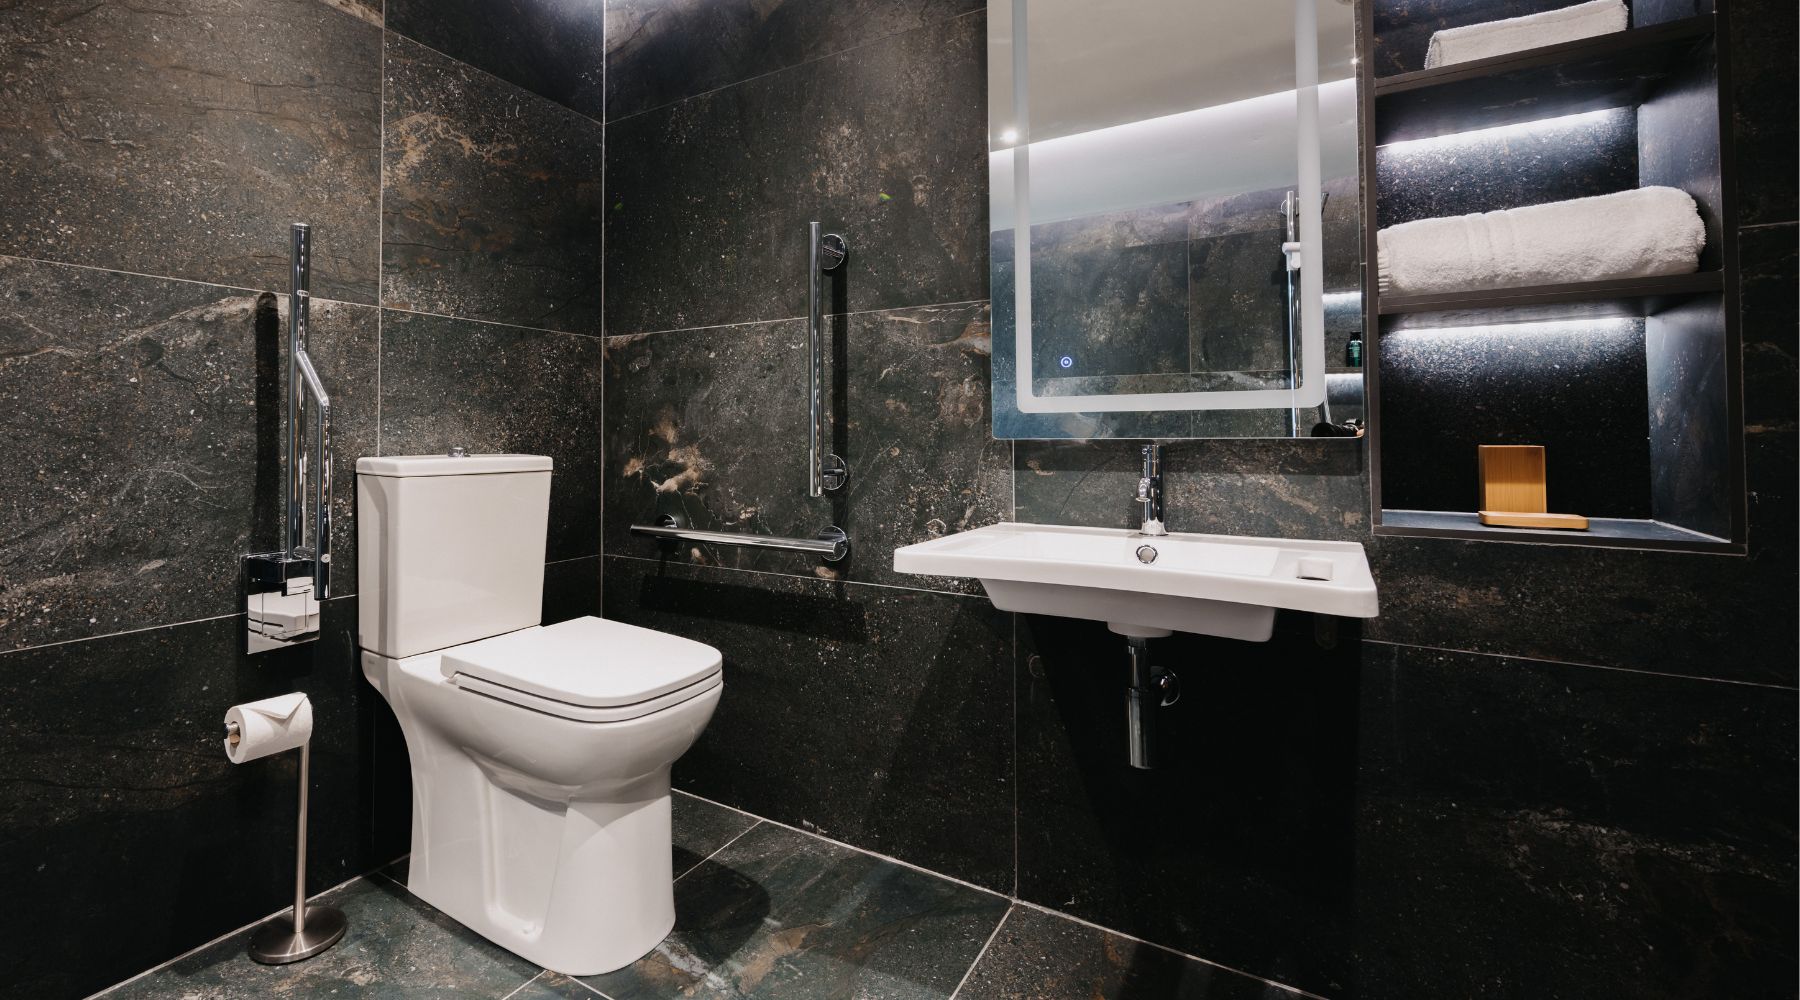 Luxury accessible bathroom with grab rails, wall mounted basin, and black and white marble effect tiles